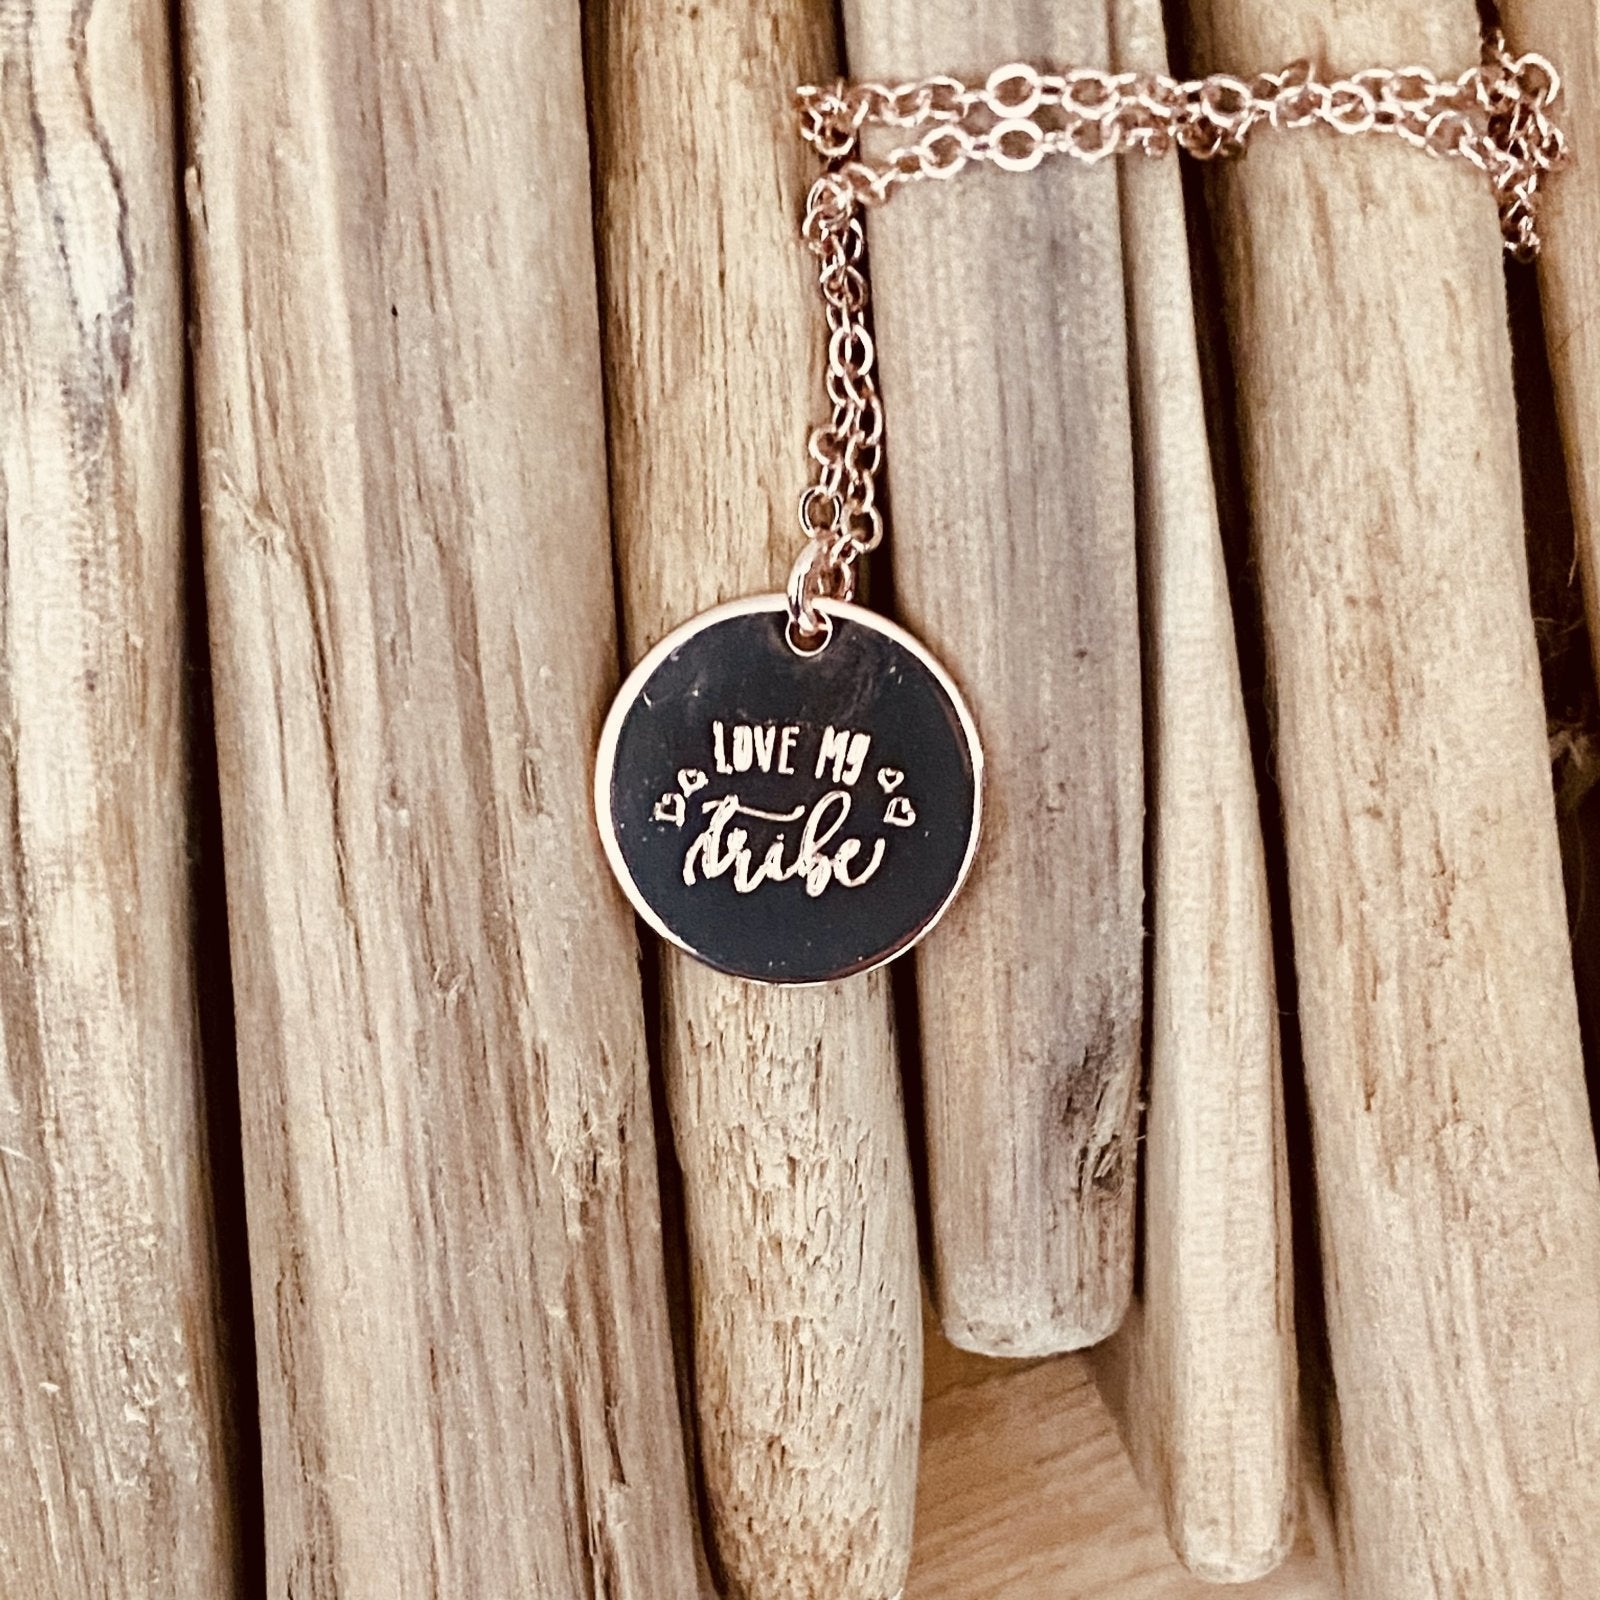 ‚Love my Tribe’ Plättchen Kette find Stylish Fashion for Little People- at Little Foxx Concept Store